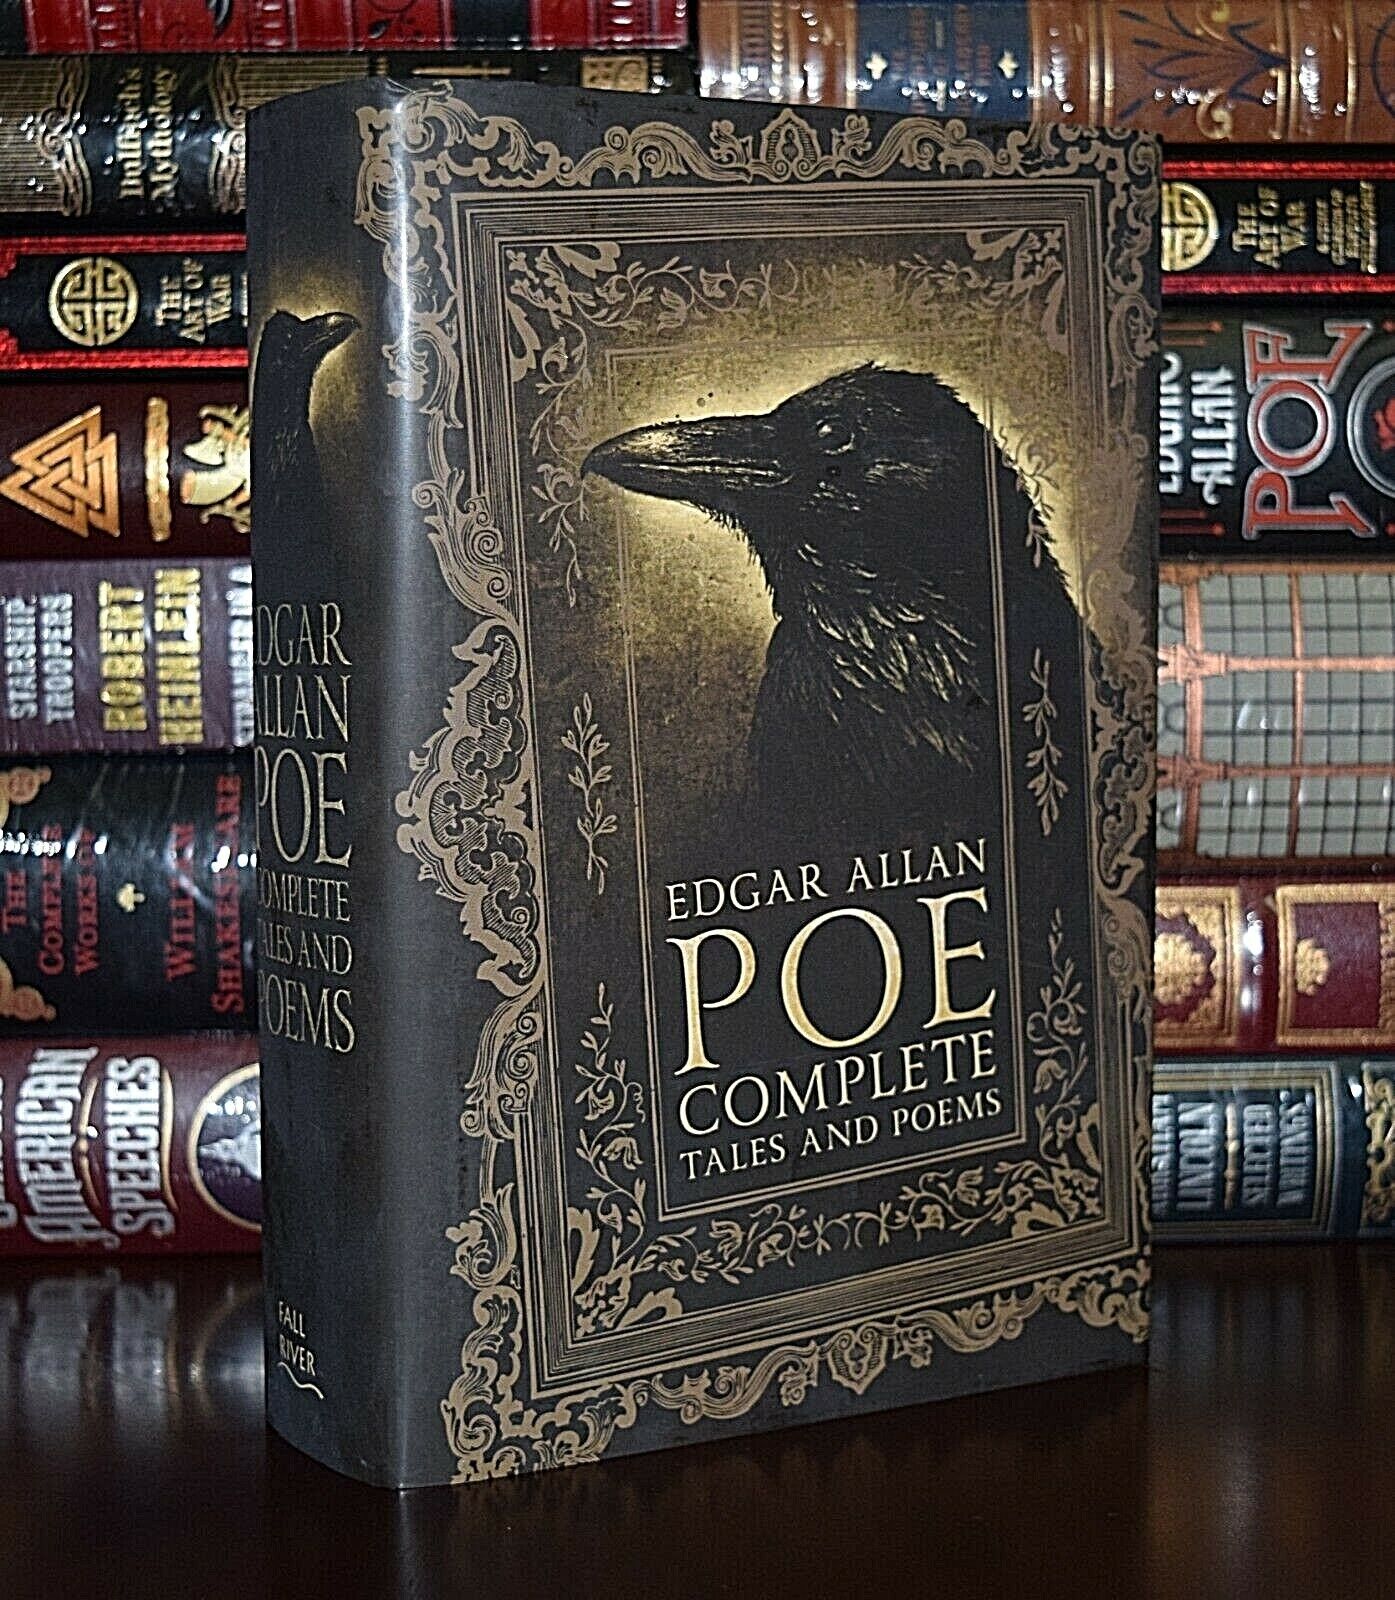 NEW Complete Tales & Poems by Edgar Allan Poe Raven Collectible Hardcover Gift